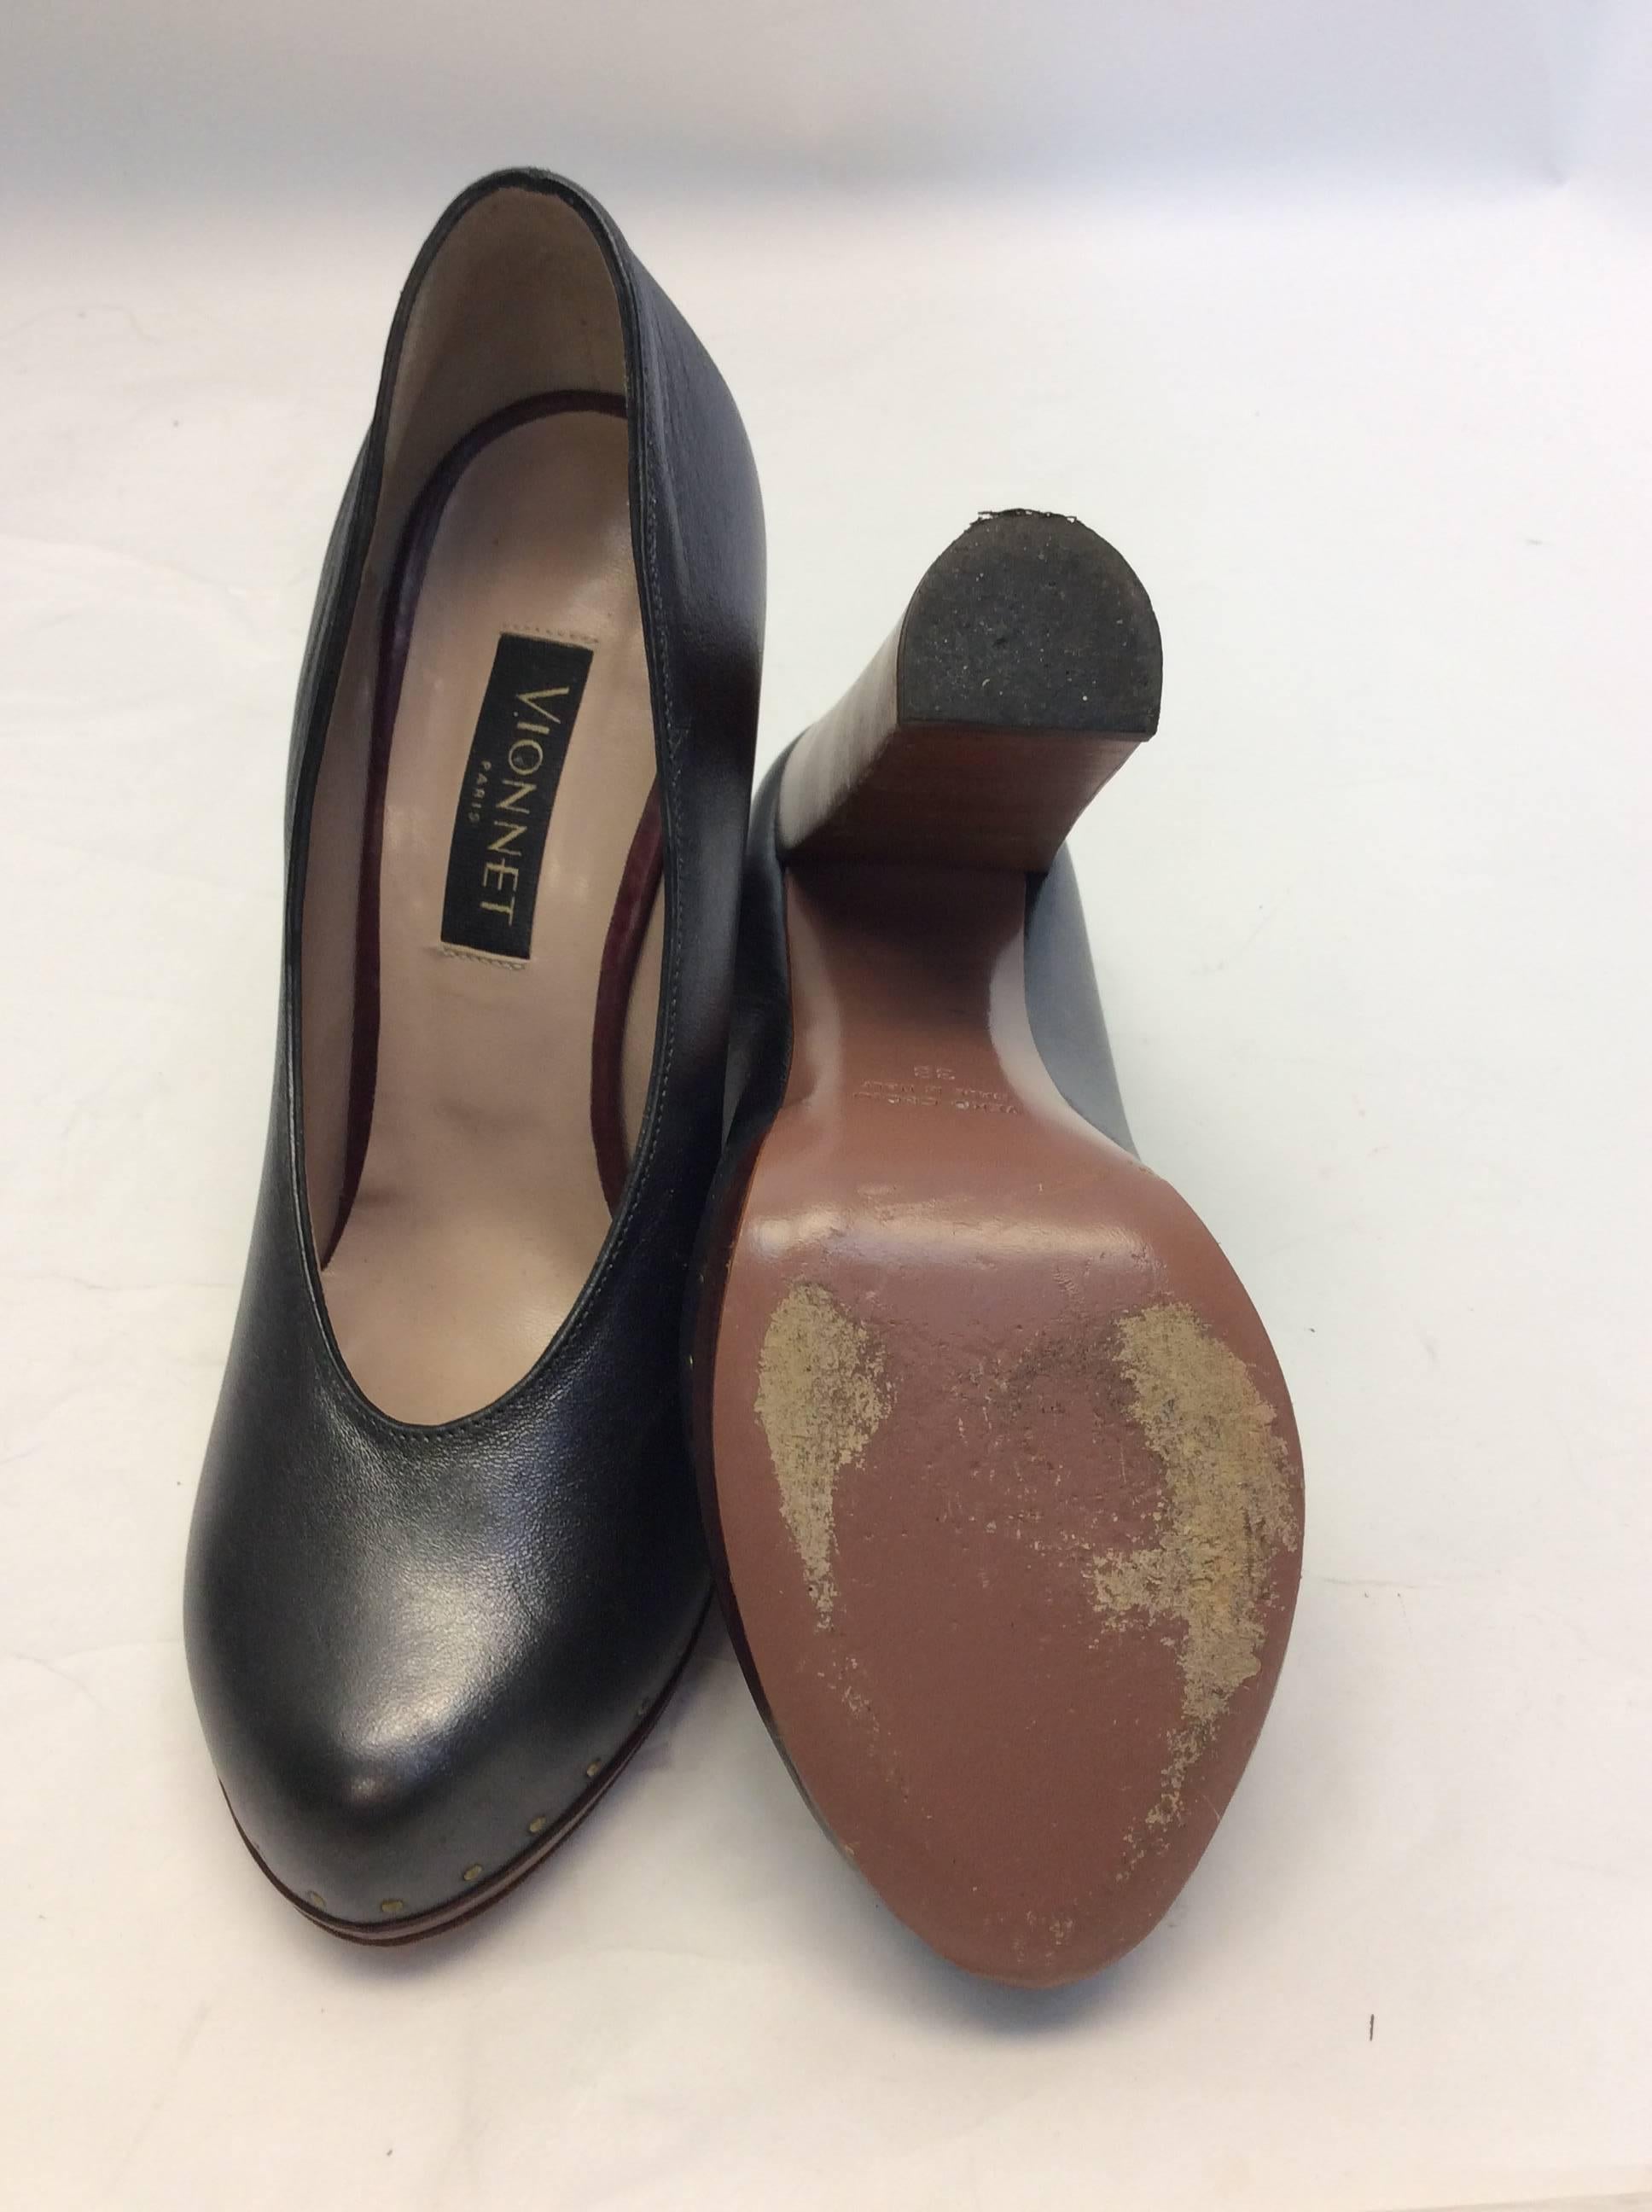 Vionnet Leather Block Heels In Excellent Condition For Sale In Narberth, PA